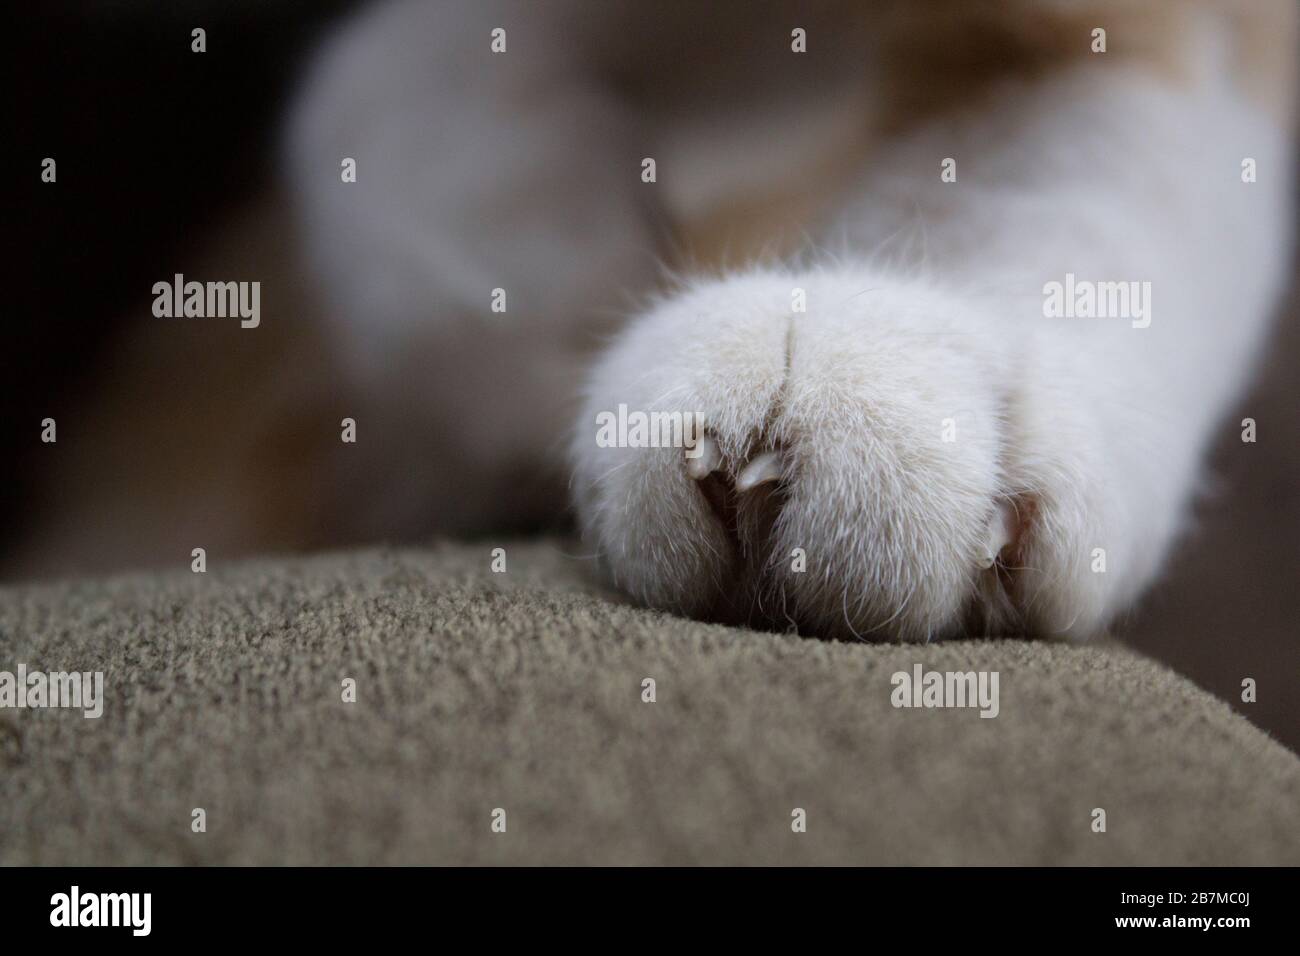 Close up image of the front left paw of a cat with nails slightly seen, on the surface of a brown  textile covered sofa. Stock Photo